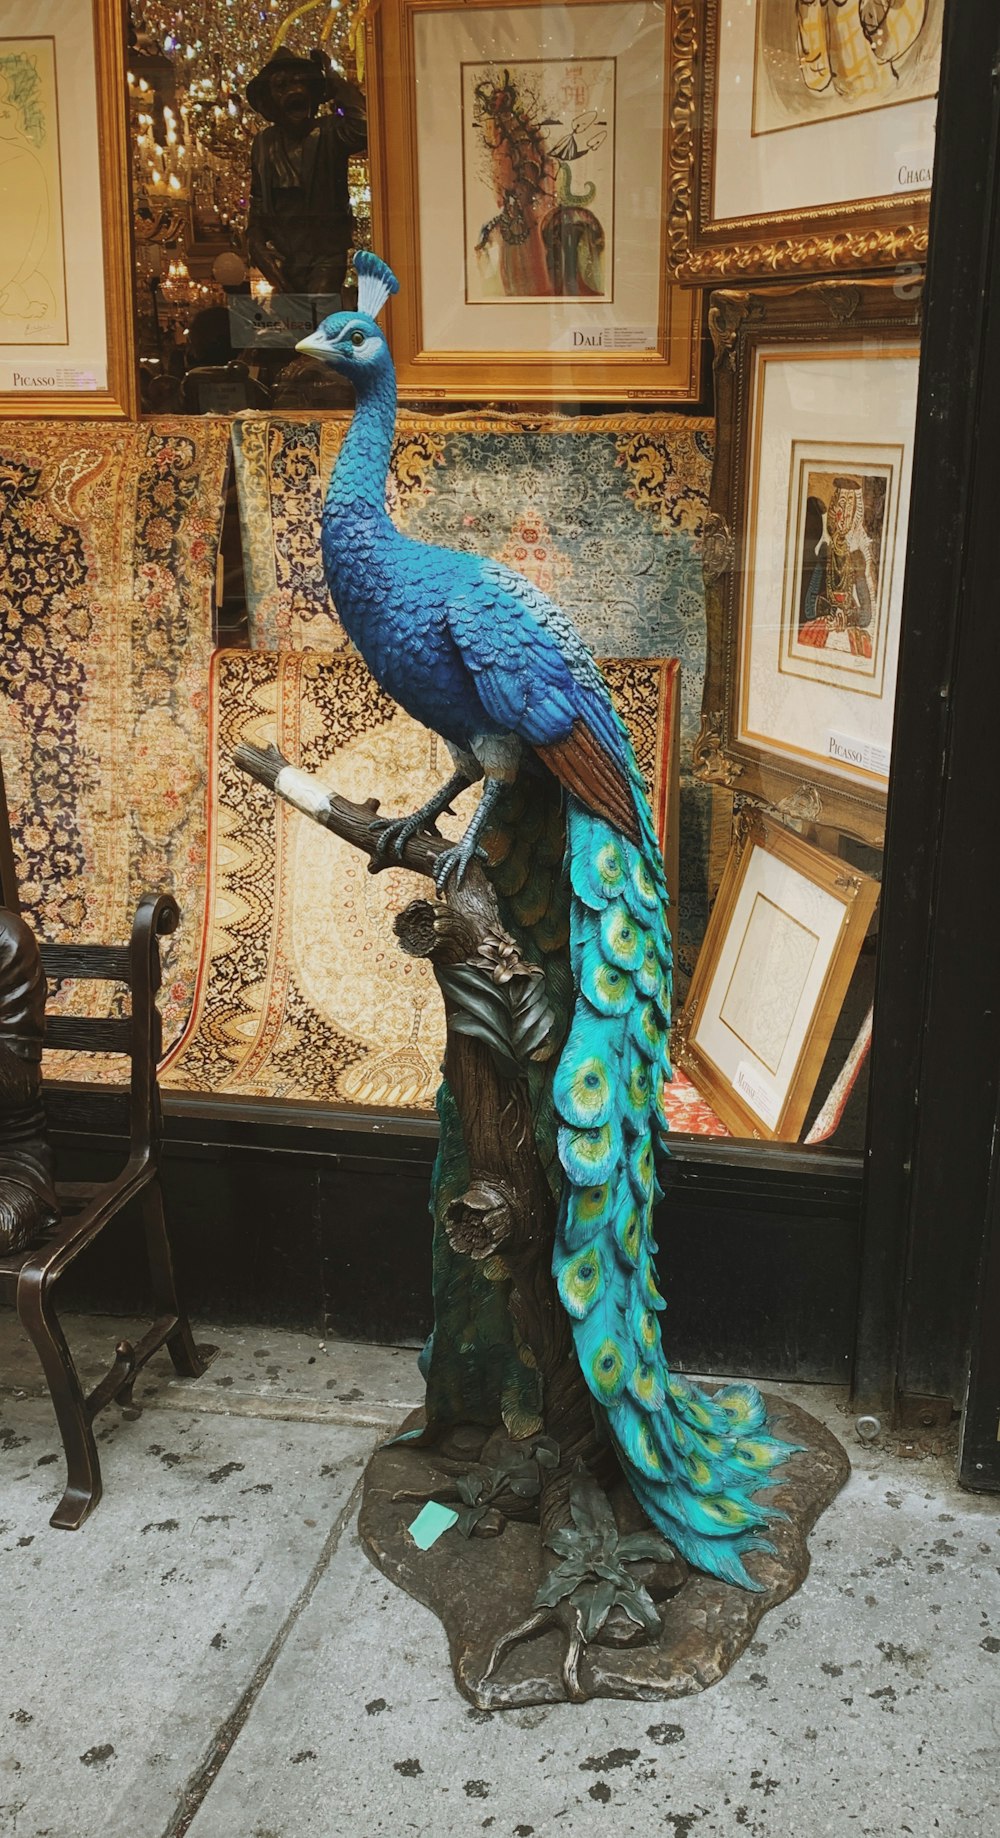 blue and green peacock statue on tree branch in room